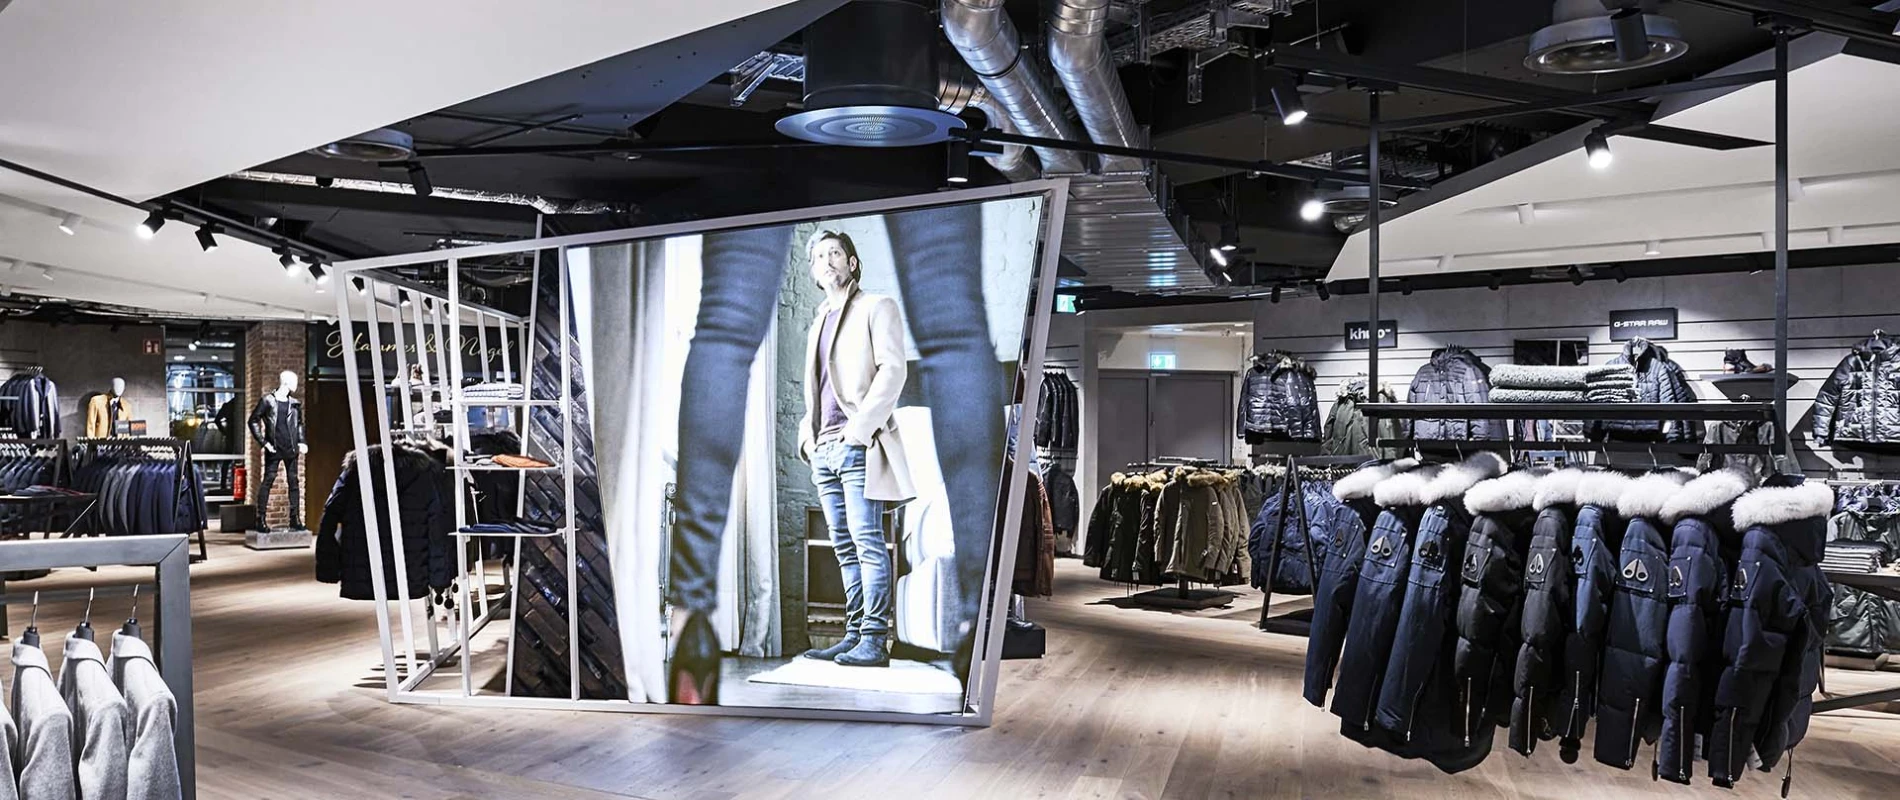 Men's Fashion Store - conception - realisation - Wormland Nuremberg - store overview - central dispay area - poster wall